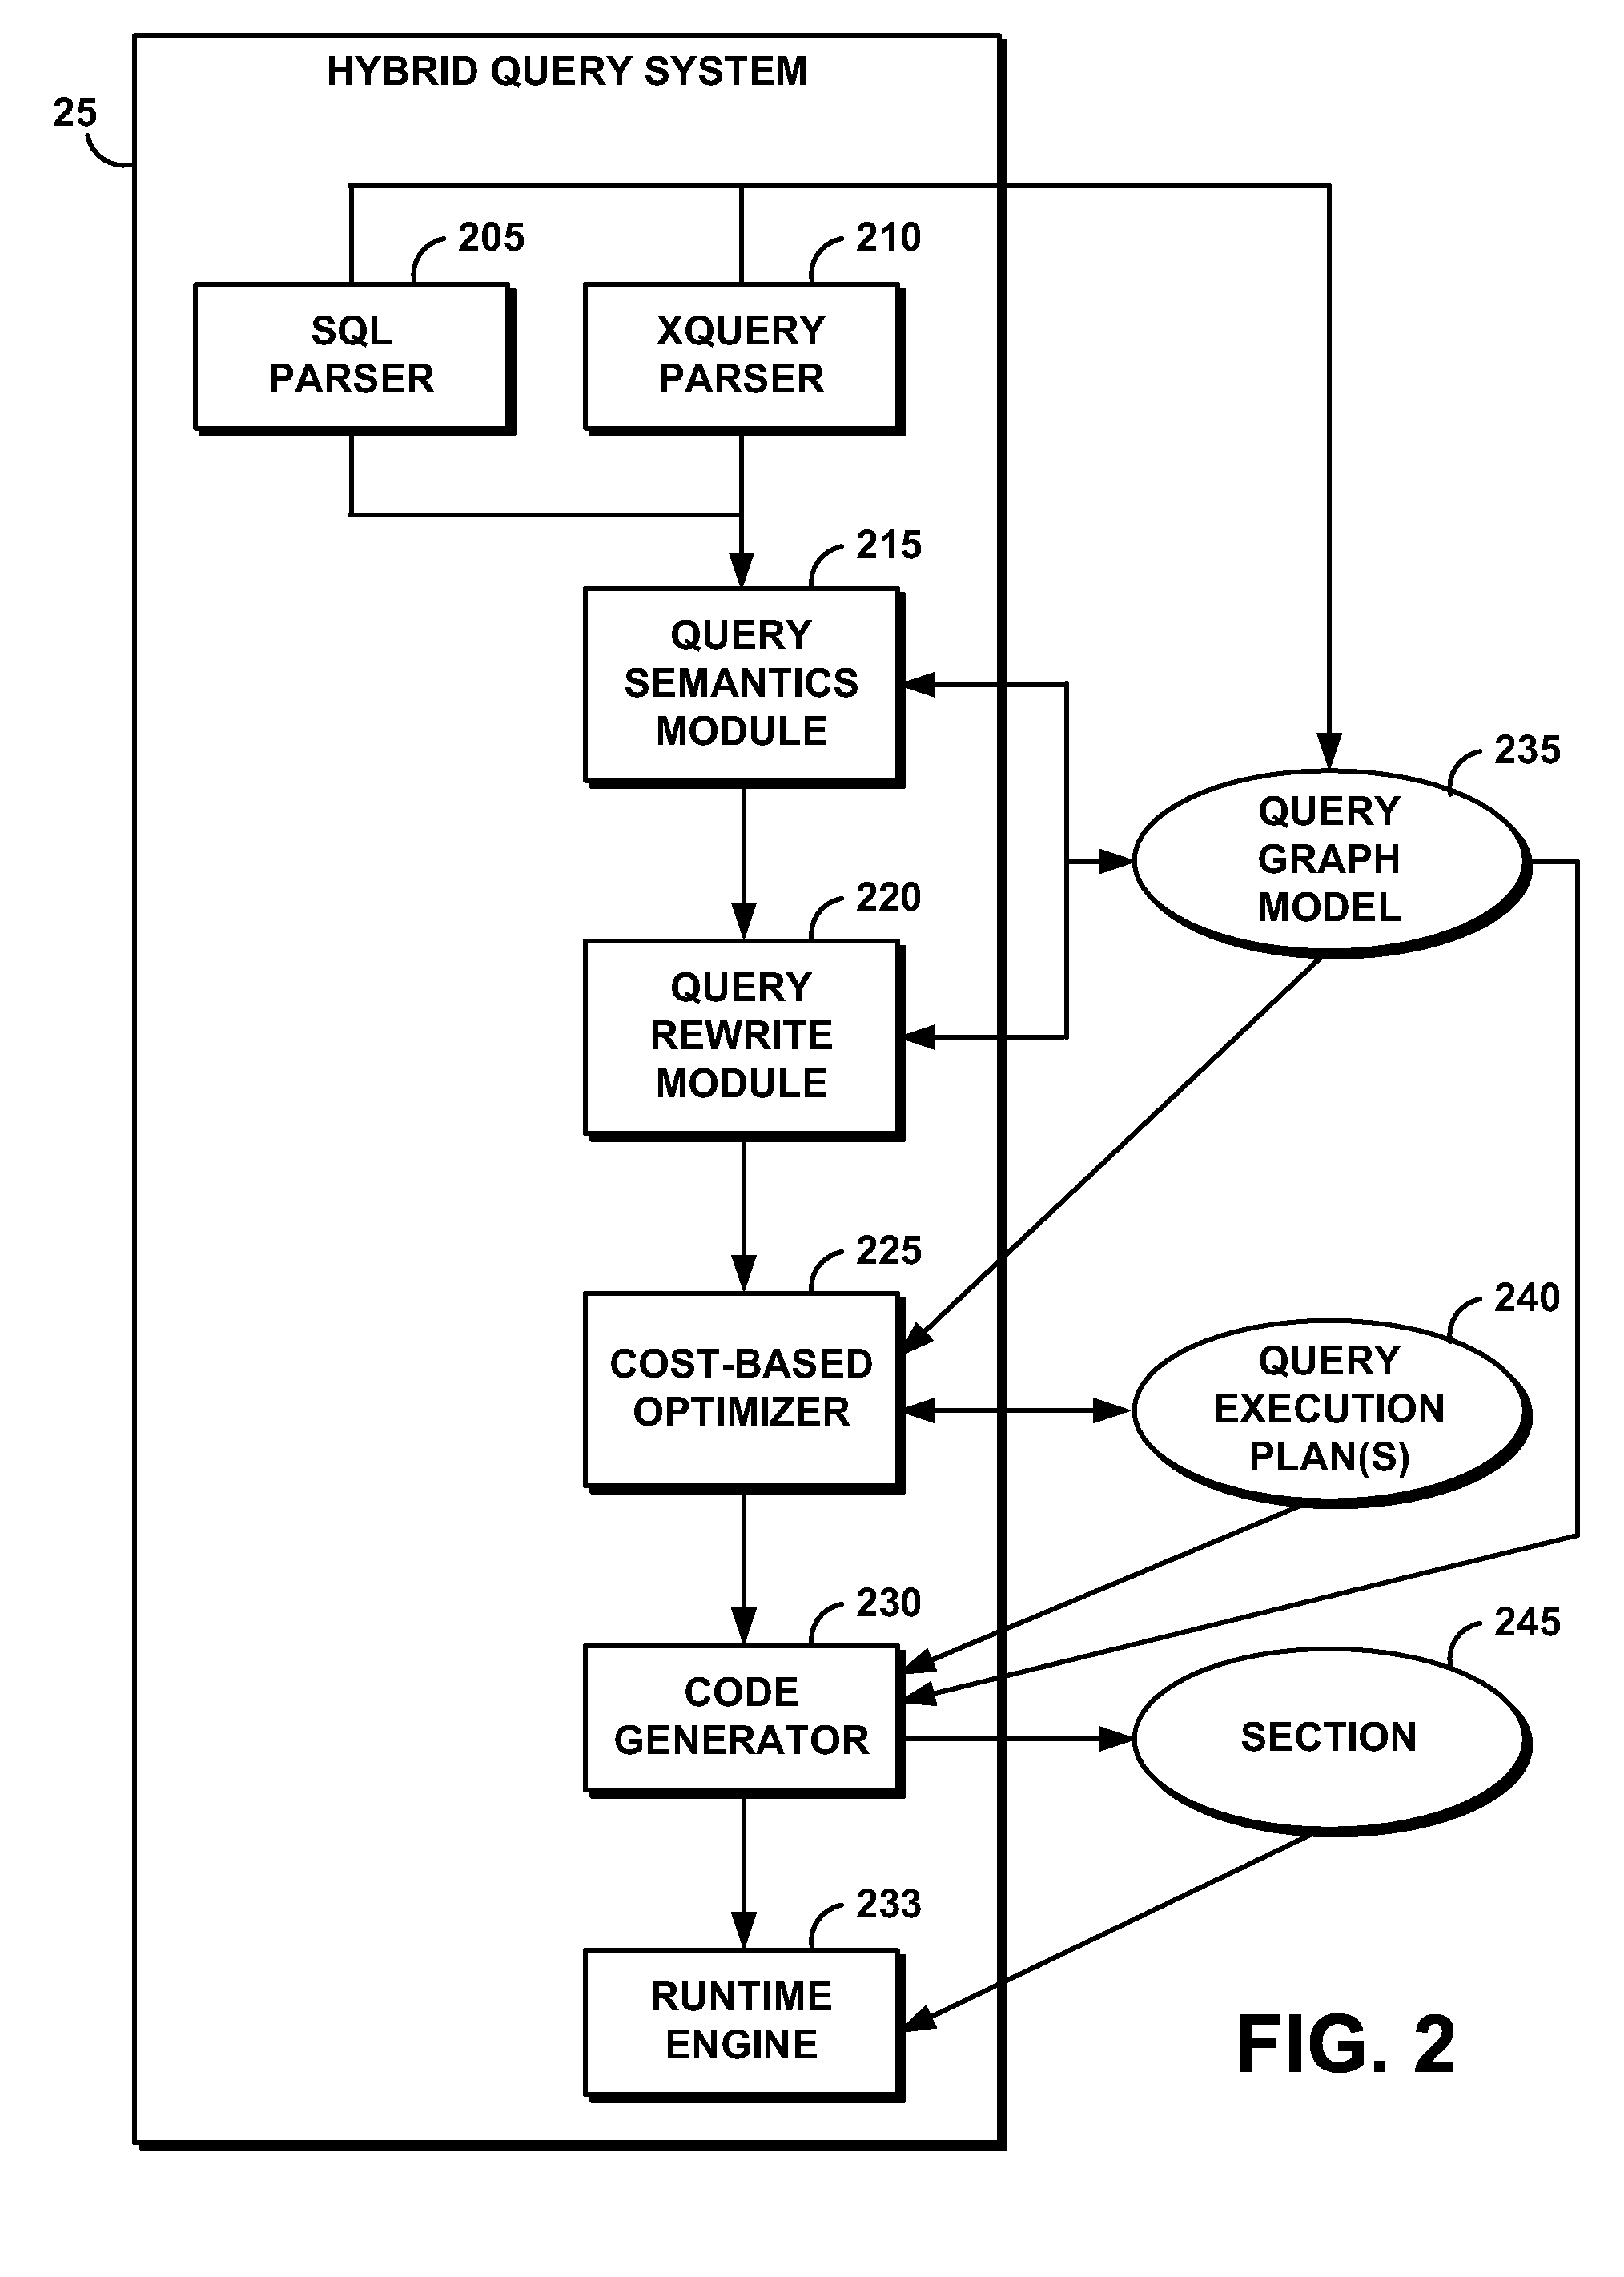 System and Method for Optimizing Query Access to a Database Comprising Hierarchically-Organized Data